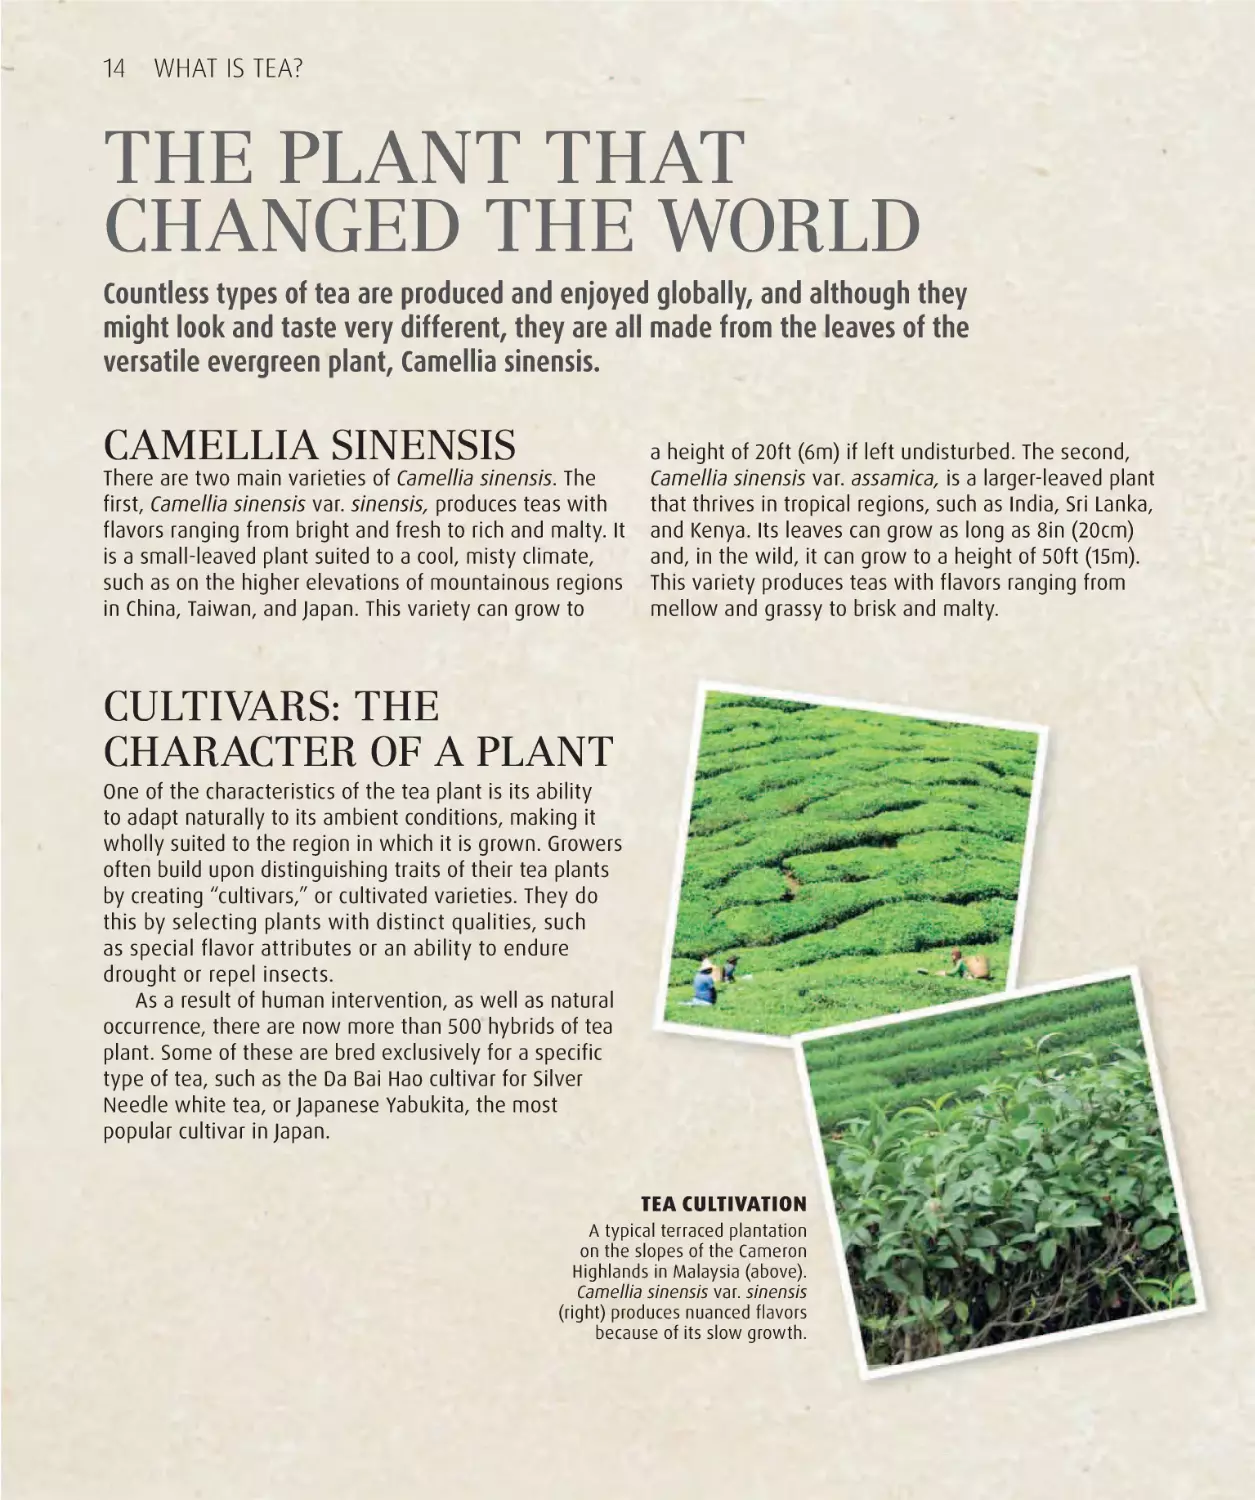 The plant that changed the world 14